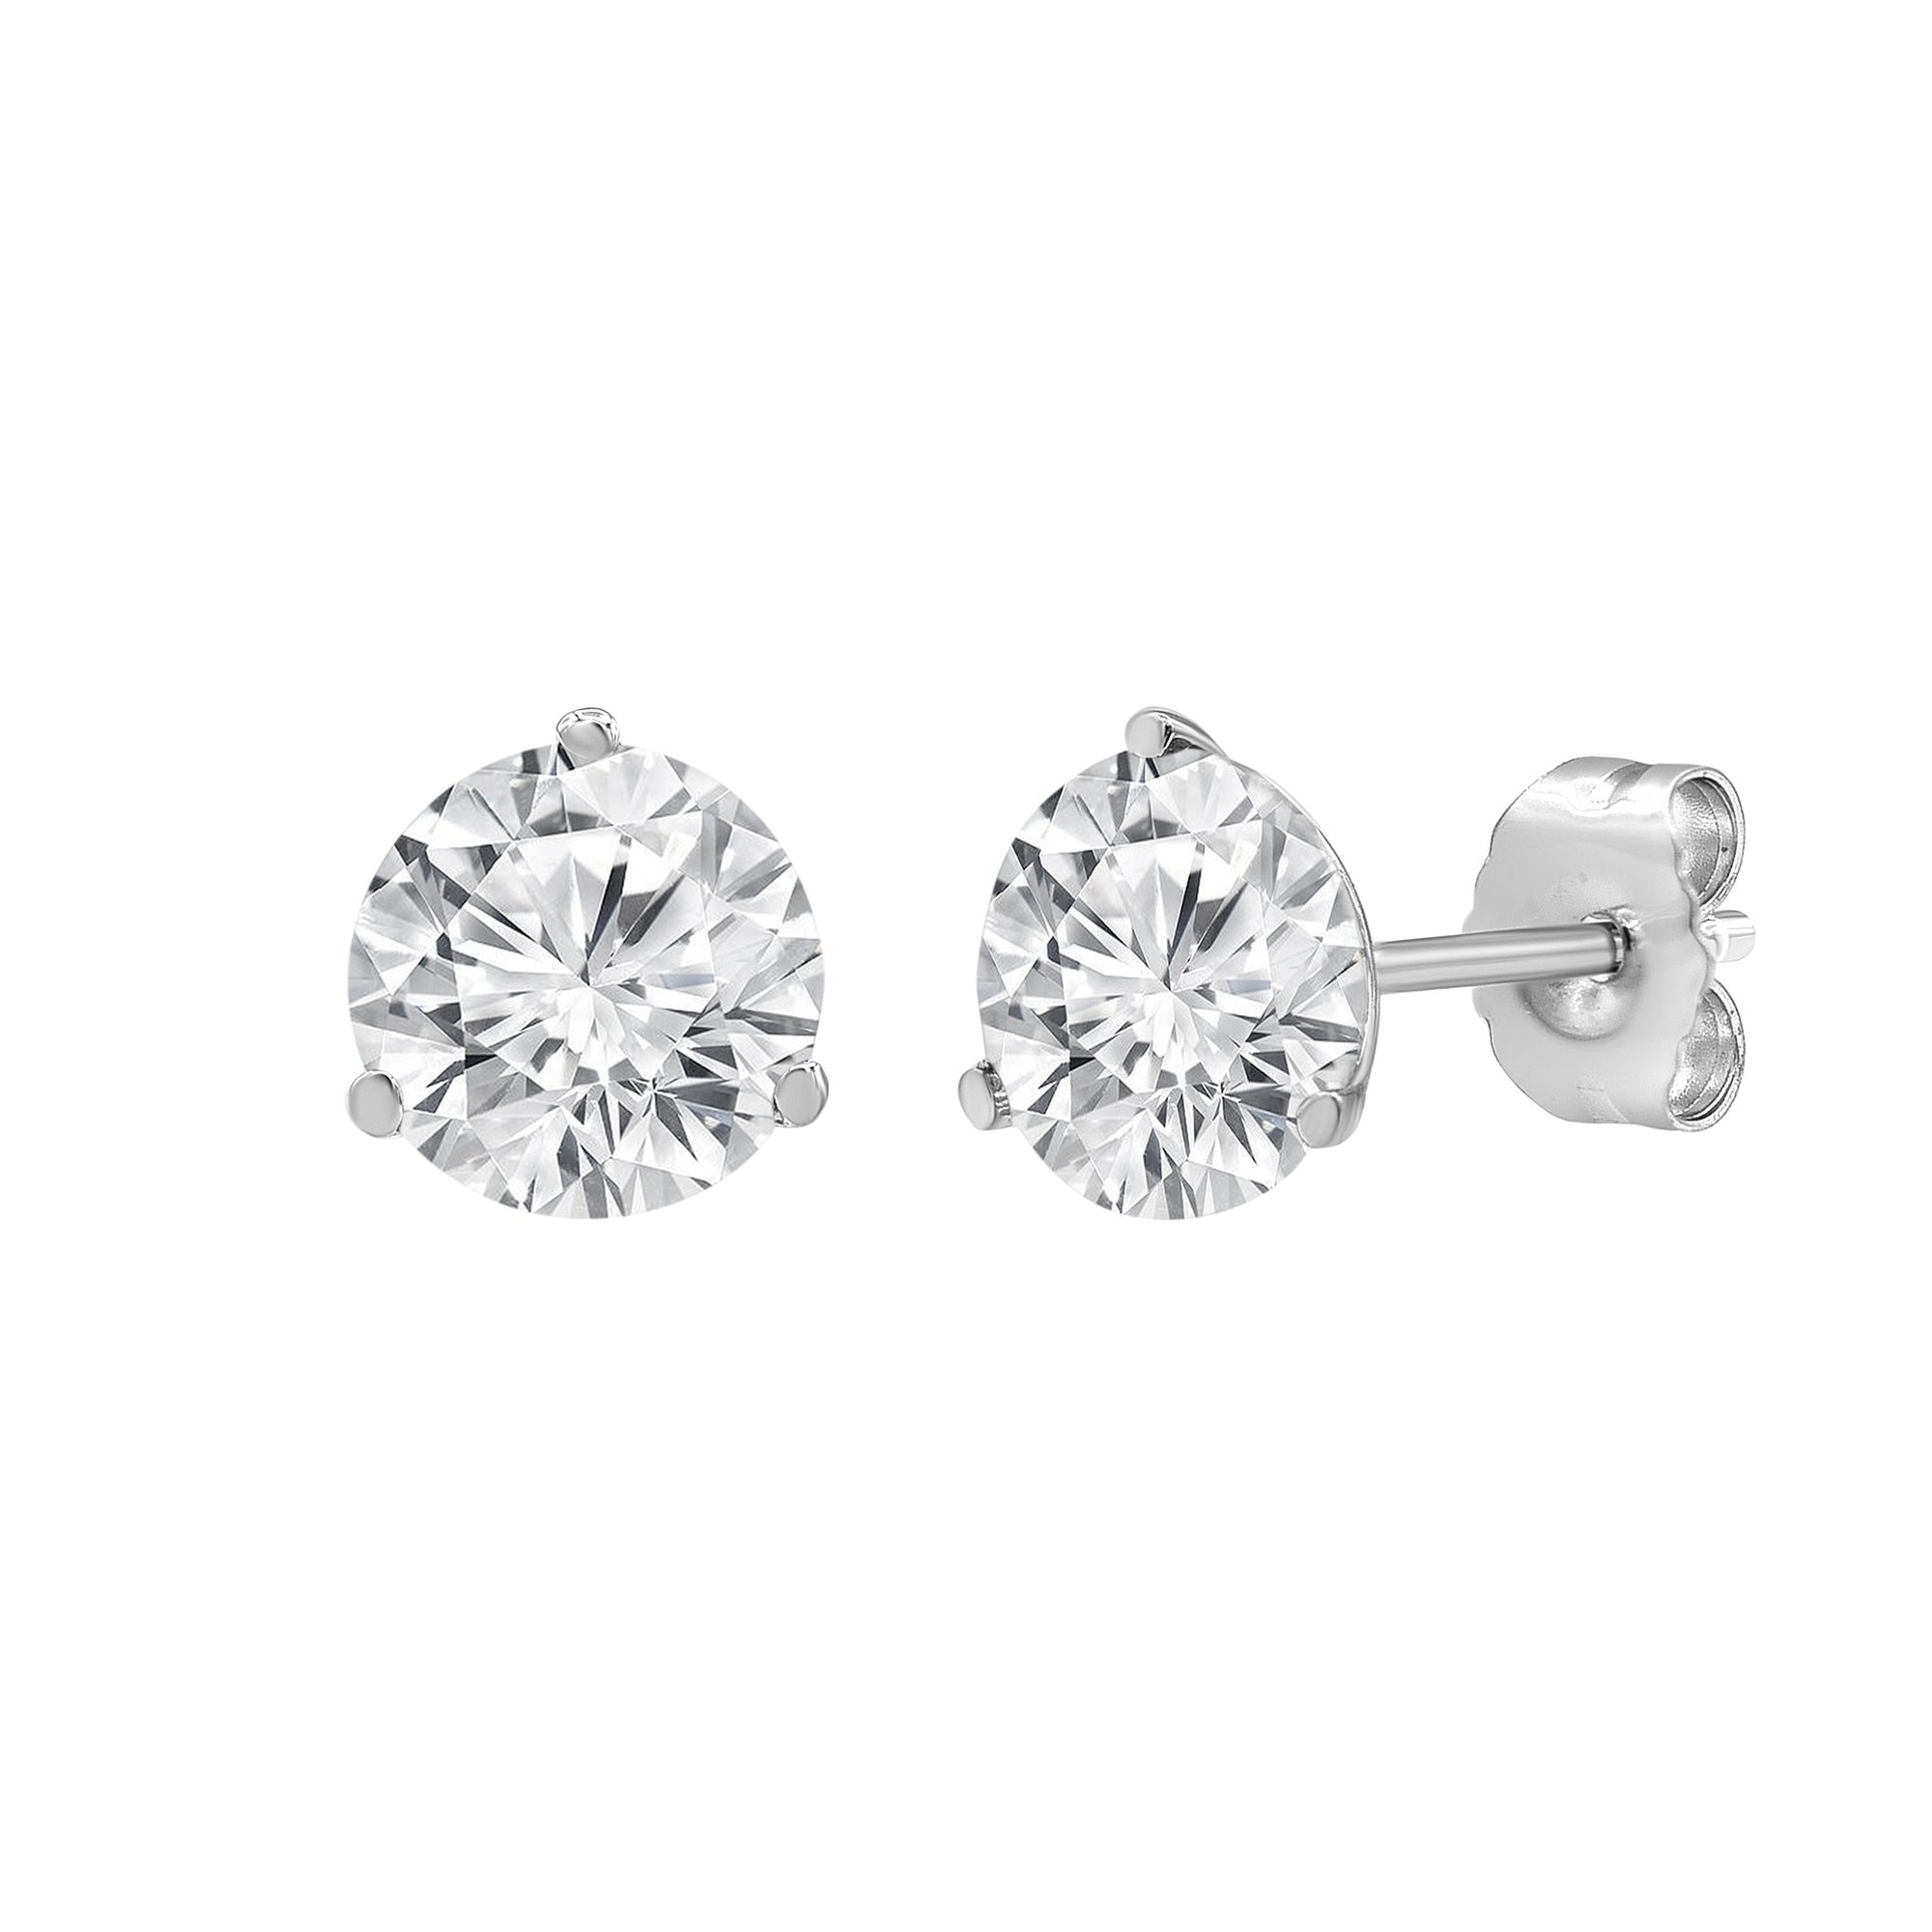 5.00 cttw 3-Prong Martini Studs - Round